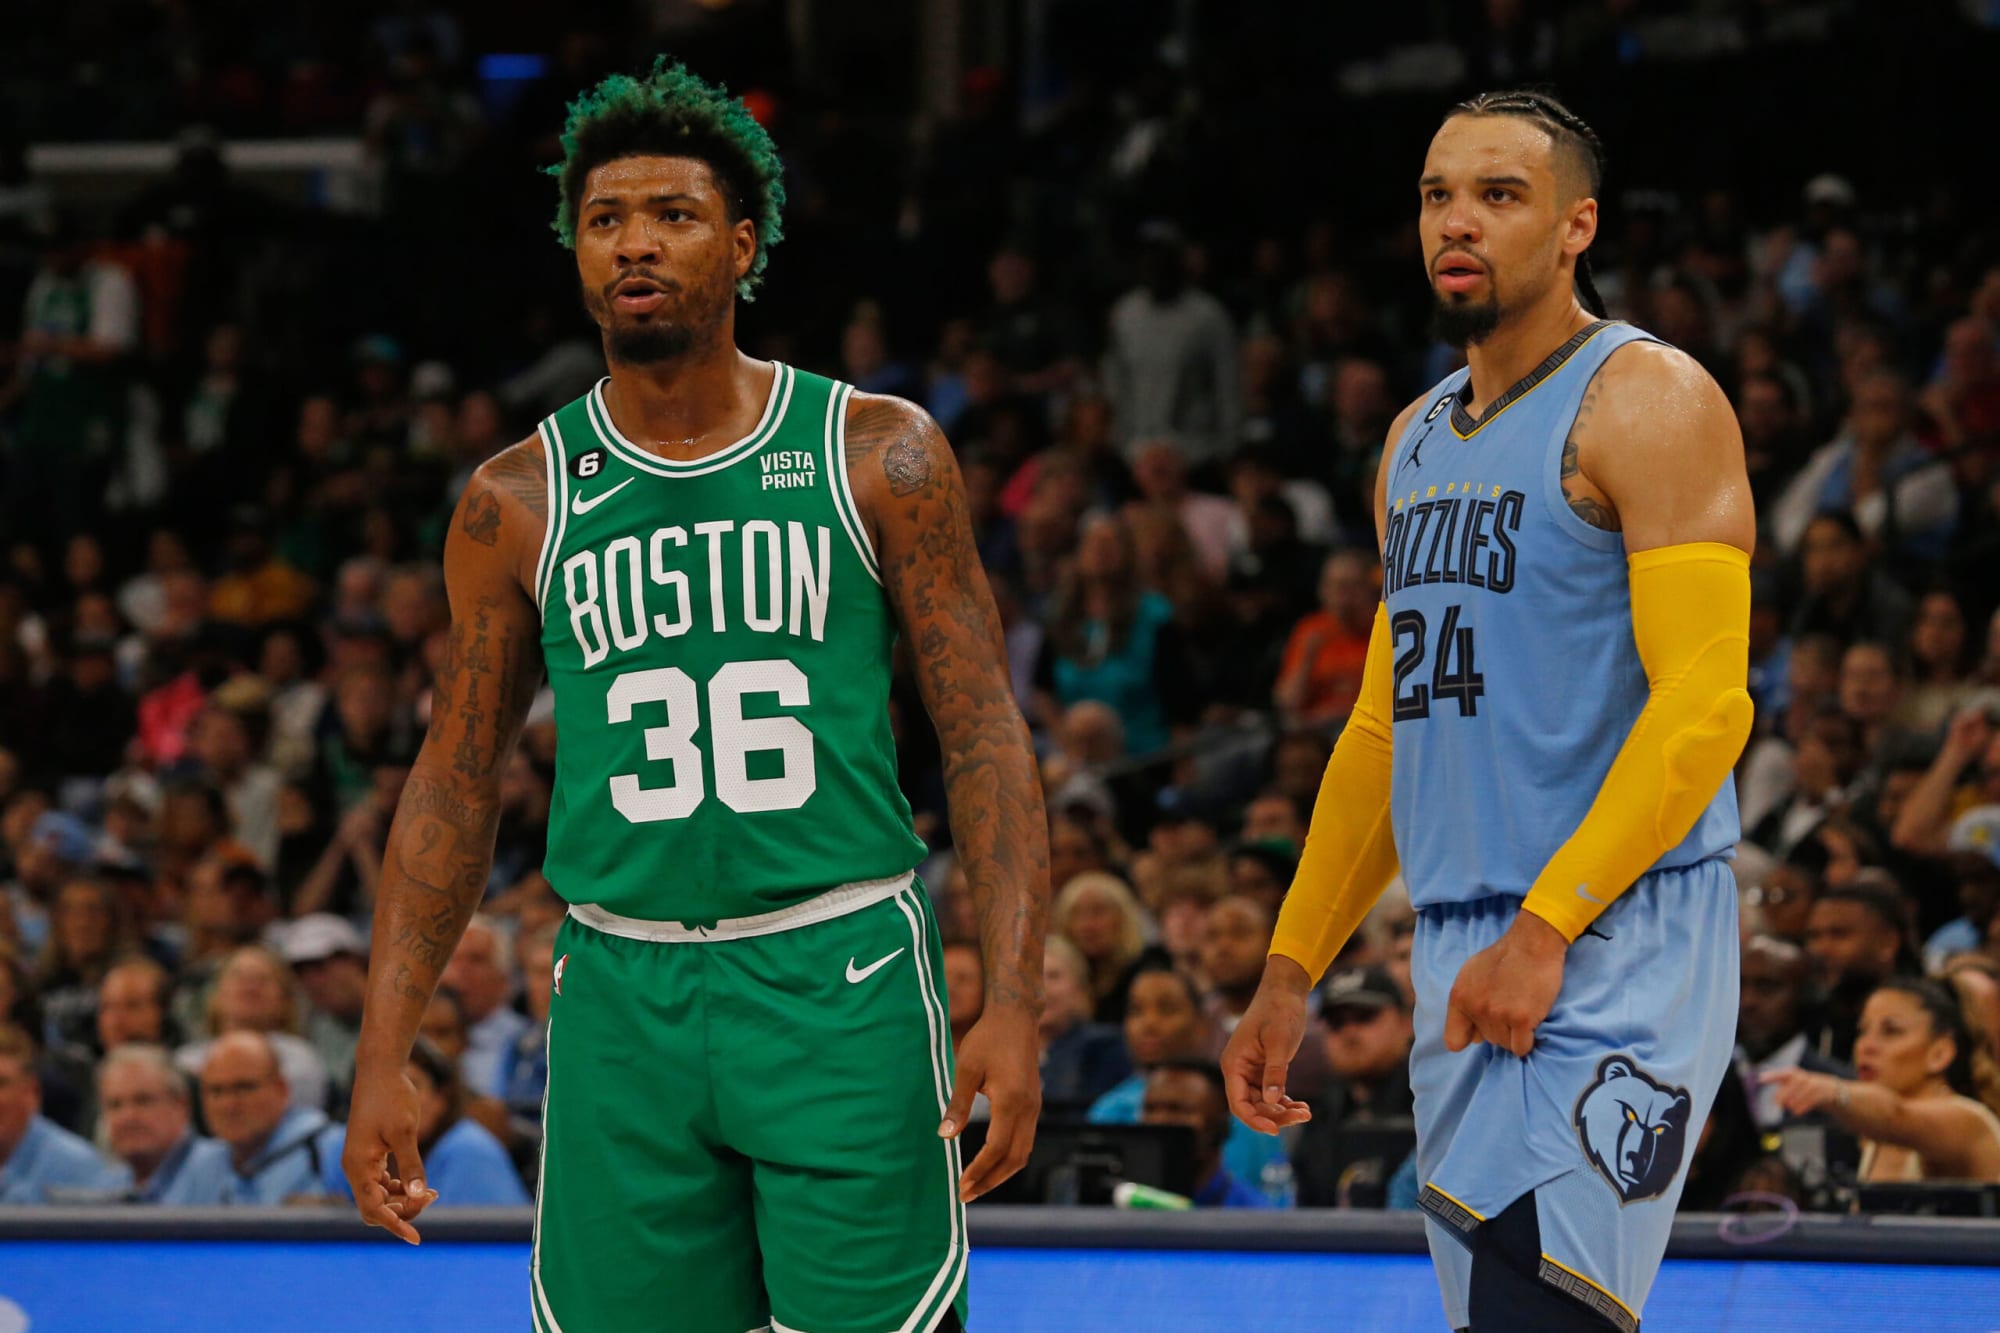 Marcus Smart thinks the Grizzlies can be NBA's best defense